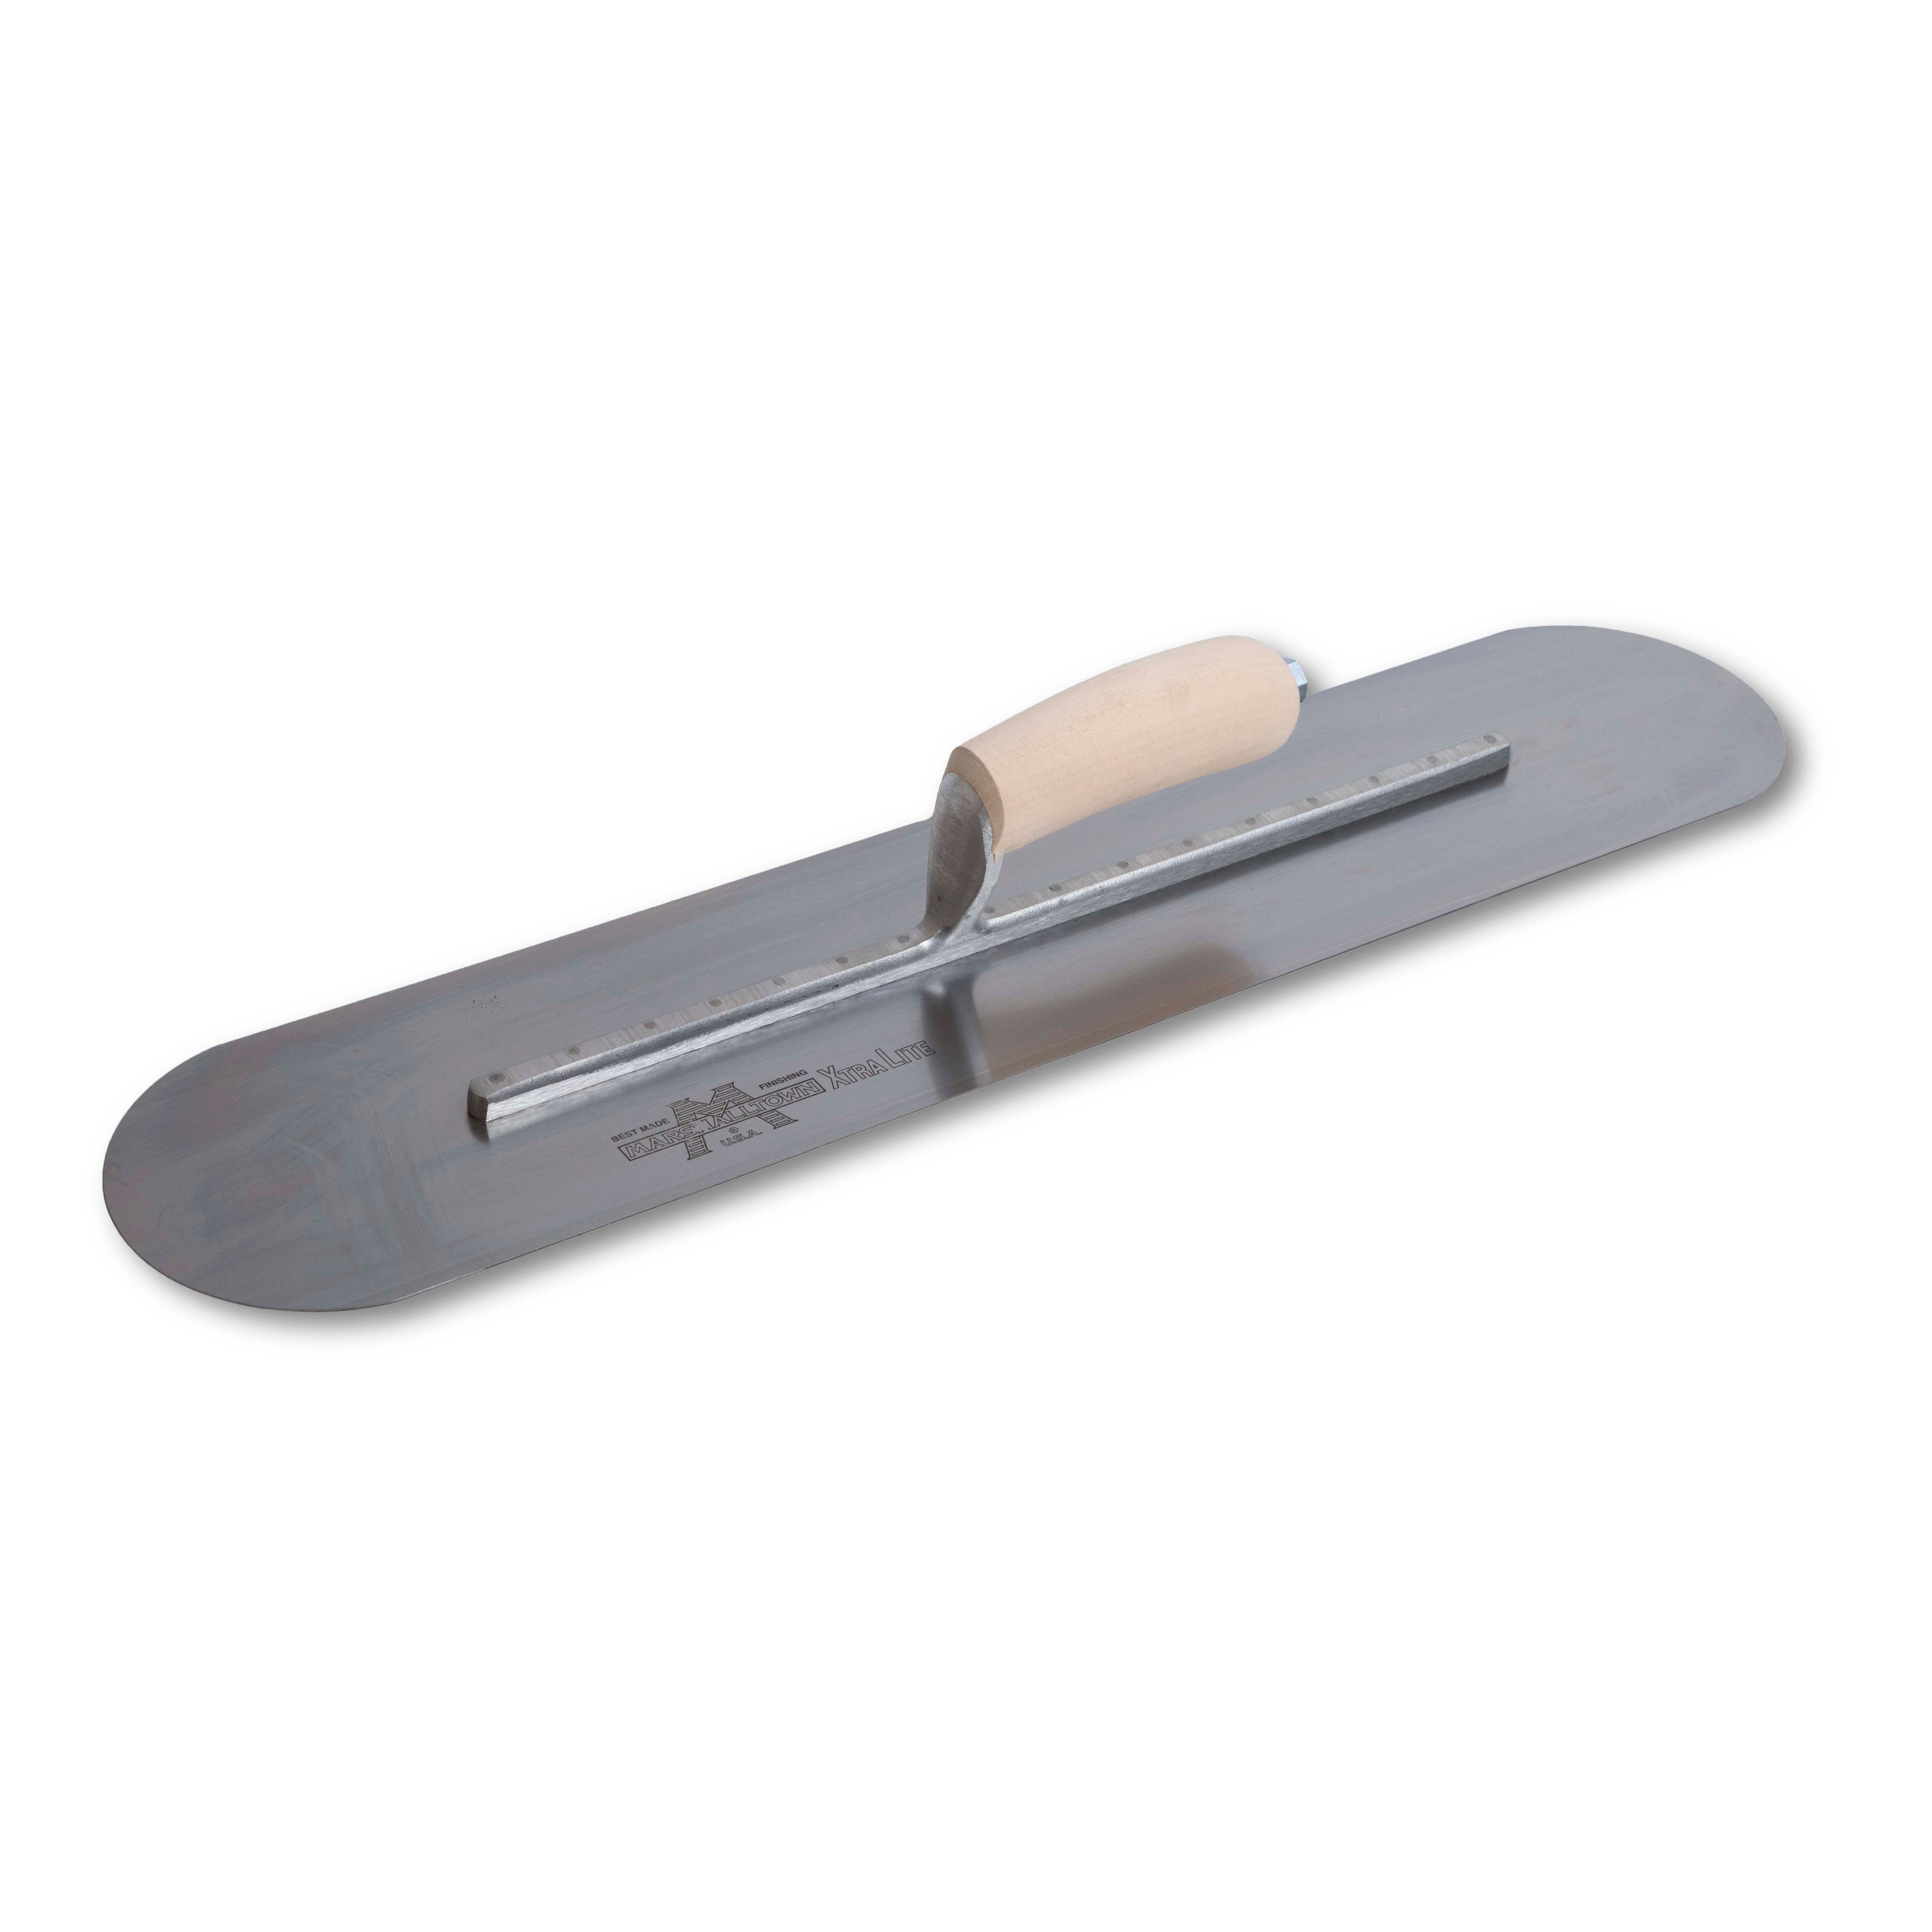 Marshalltown MXS245FR 24in. x 5in. Finishing Trl-Fully Rounded Curved Wood Handle MAT-MXS245FR